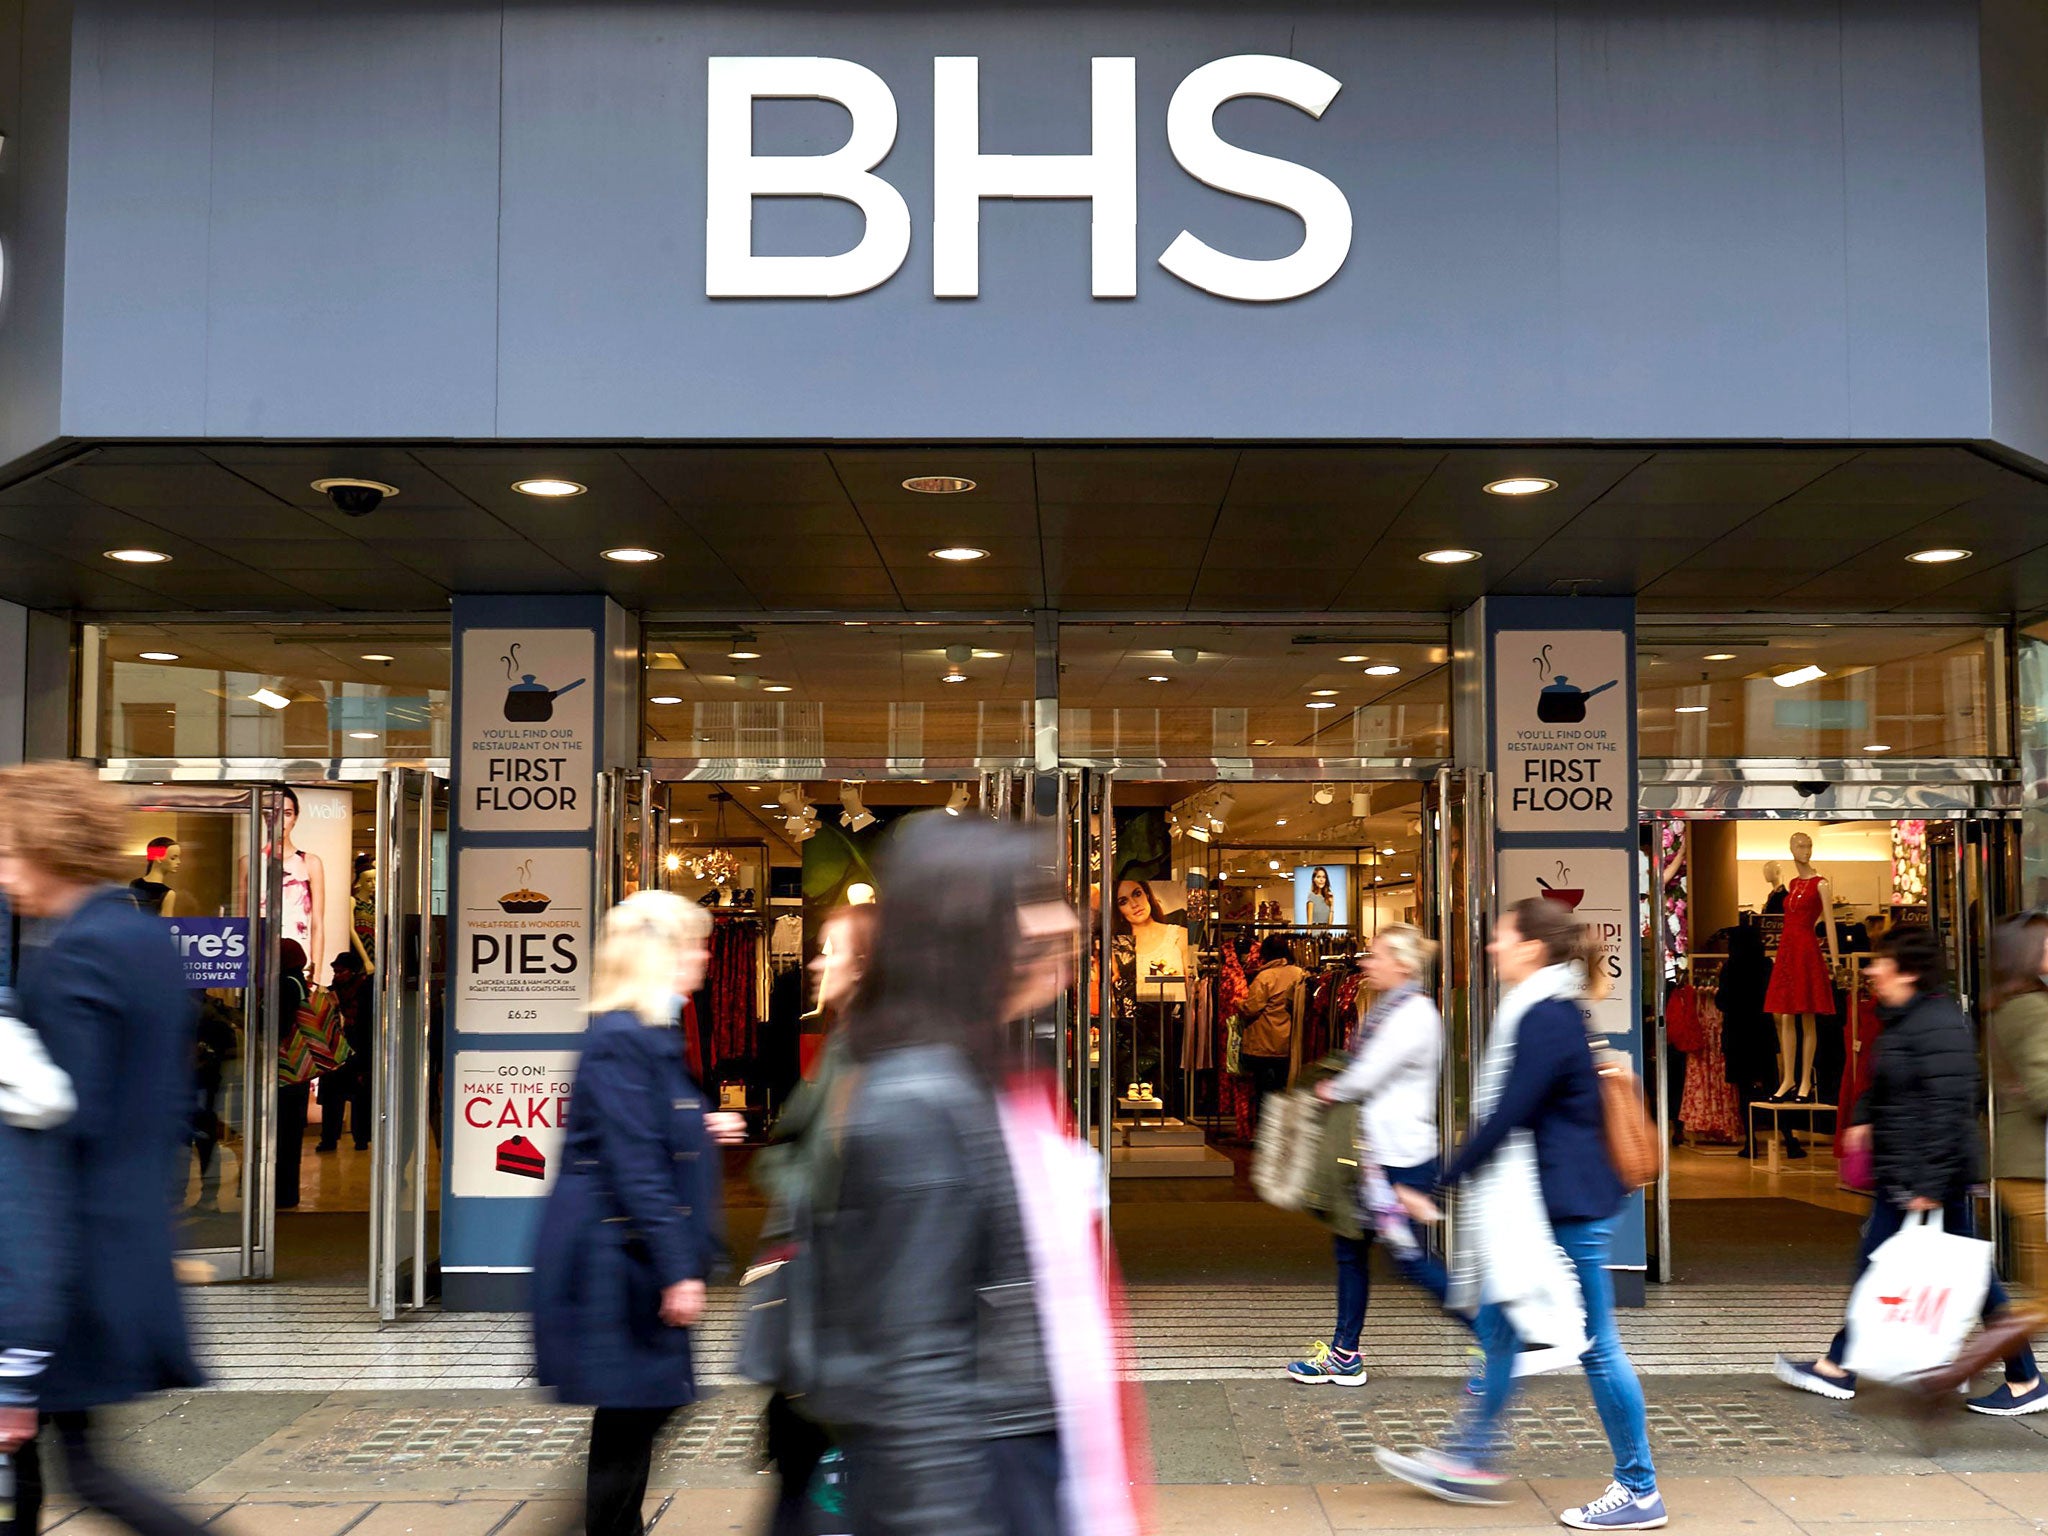 The BHS pension fund is £571m short of the money it needs to honour the pension promises made to members